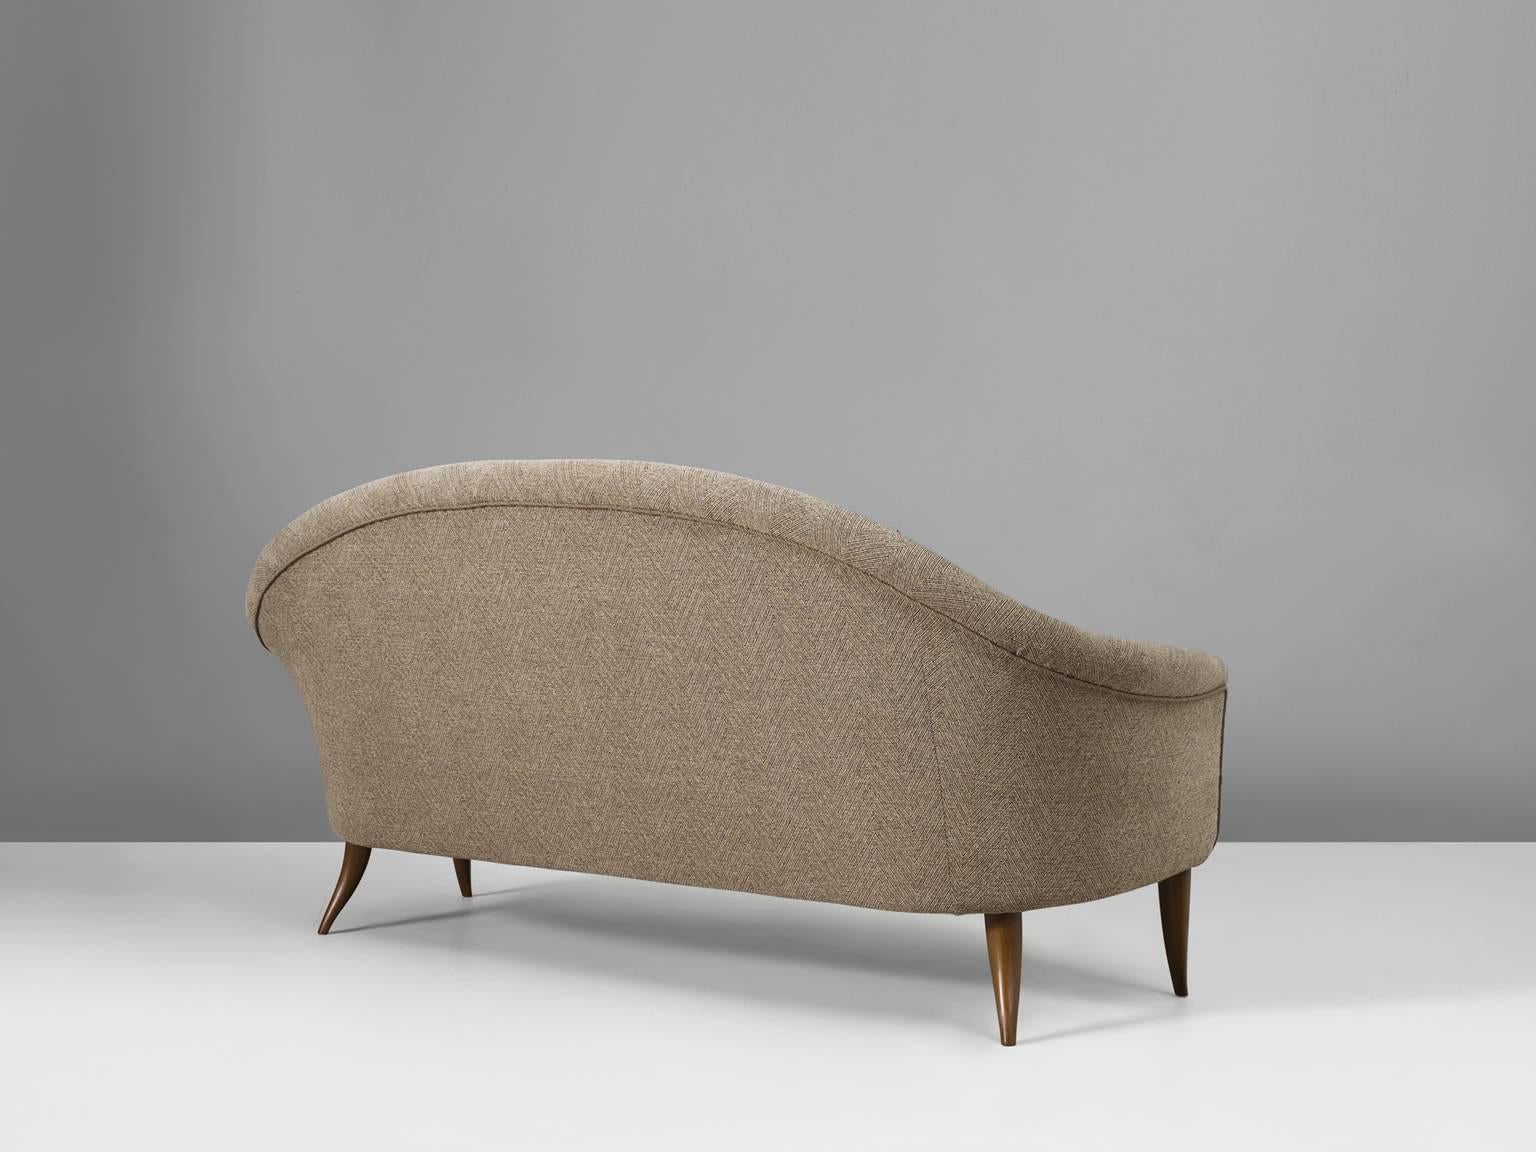 Sofa 'Stora Paradiset', in fabric and wood, by Kerstin Horlin-Holmqvist for Nordiska Kompaniet, Sweden, 1958. 

The beautifully tapered and curved legs compliment the design of the seat perfectly. The armrests run over smoothly into the back and